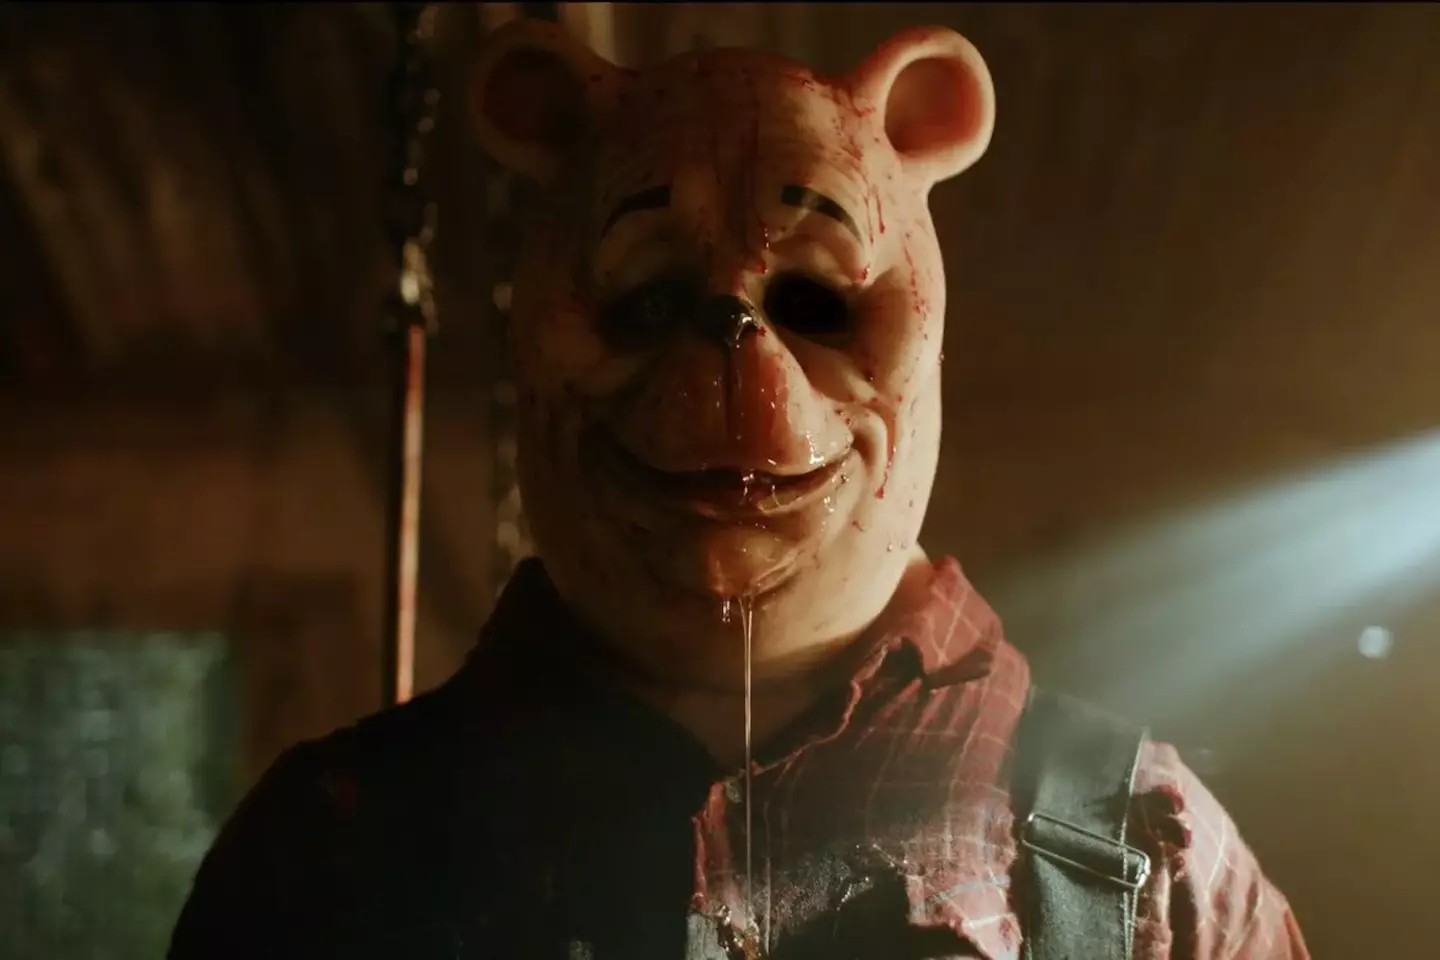 Characters from Winnie-the-Pooh became part of the public domain last year, making a horror version possible.